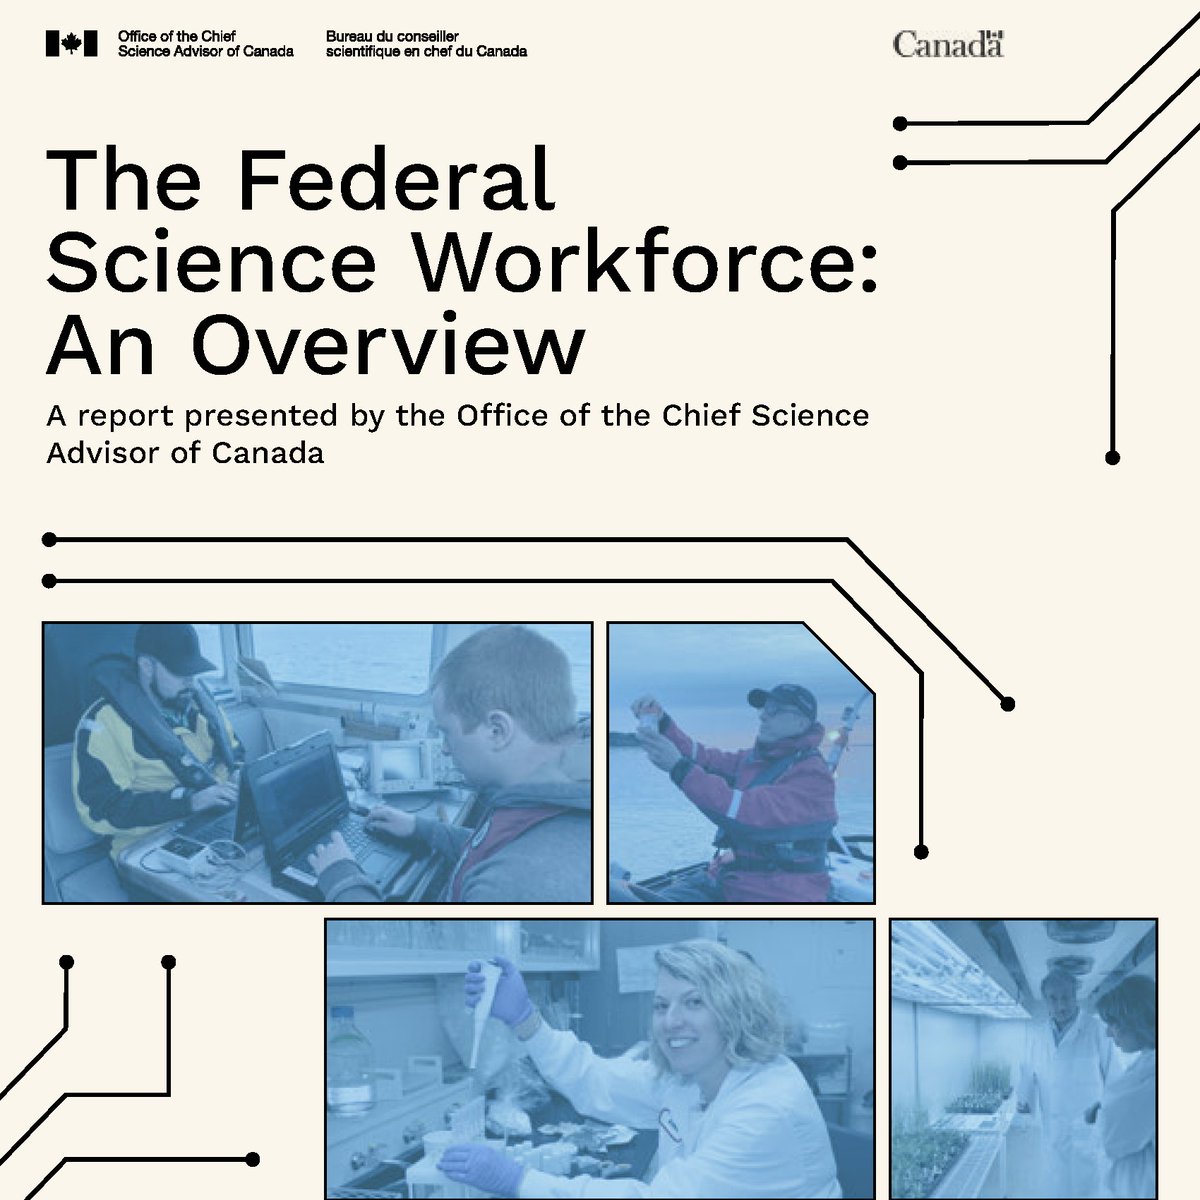 Federal scientists play a key role in Canadian society thanks to the quality of their #research, the depth of their analyses and the insight of their advice. Find out more about the state of the federal science workforce in my recent report: science.gc.ca/site/science/e… 🧵1/2